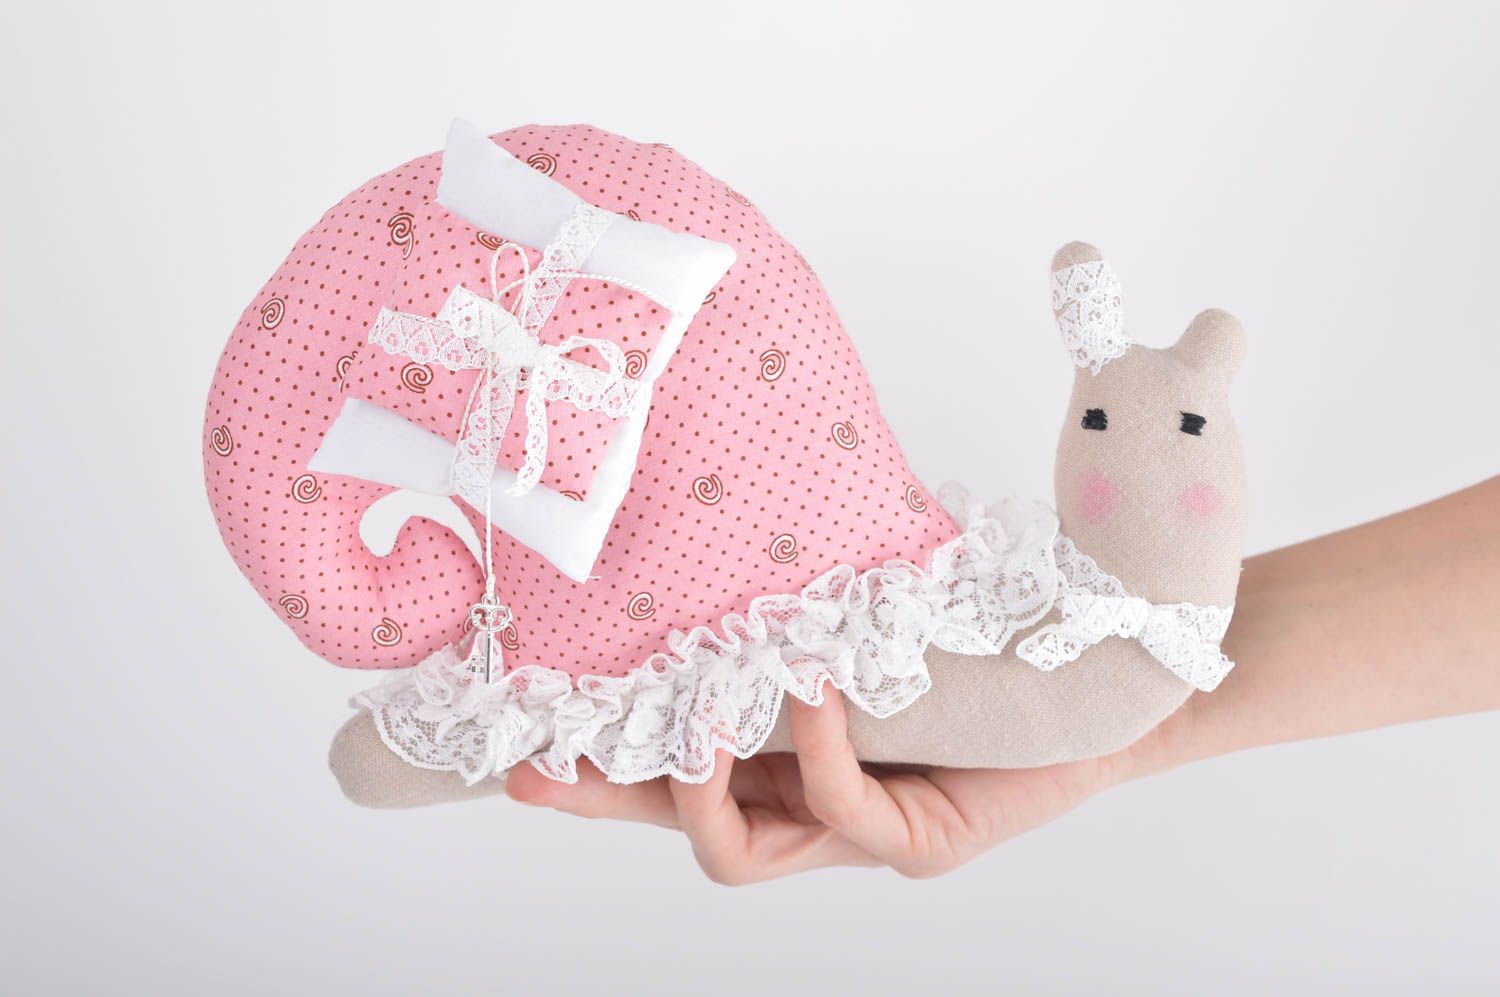 Beautiful handmade soft toy for girl best toys for kids birthday gift ideas photo 5